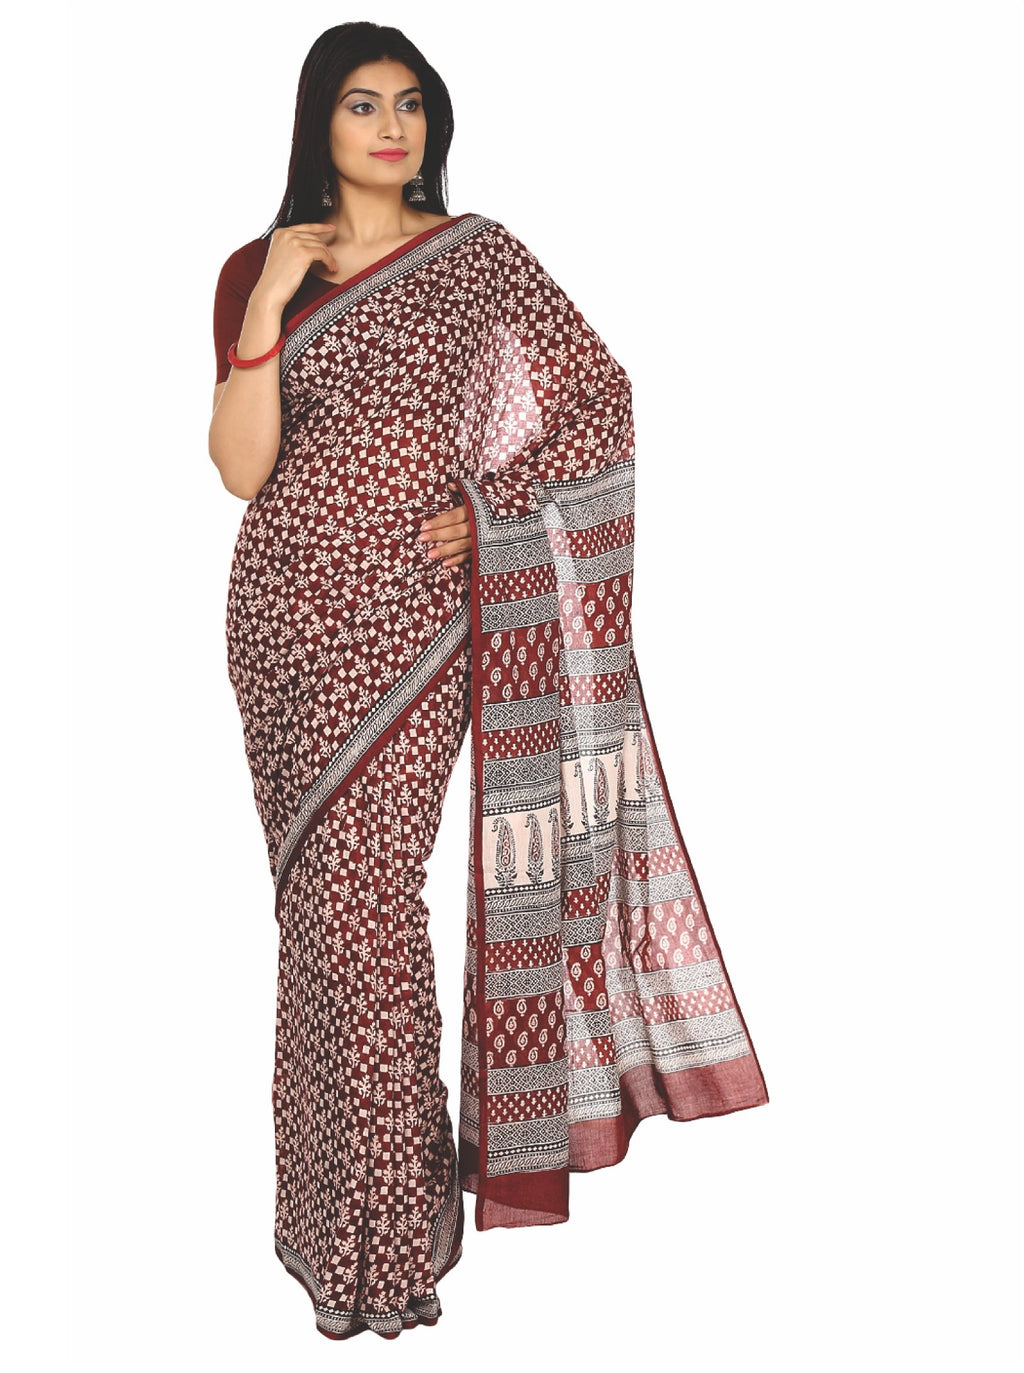 Kalakari India Maroon & Beige Bagh Handblock Print Handcrafted Cotton Saree-Saree-Kalakari India-ZIBASA0010-Bagh, Cotton, Geographical Indication, Hand Blocks, Hand Crafted, Heritage Prints, Natural Dyes, Sarees, Sustainable Fabrics-[Linen,Ethnic,wear,Fashionista,Handloom,Handicraft,Indigo,blockprint,block,print,Cotton,Chanderi,Blue, latest,classy,party,bollywood,trendy,summer,style,traditional,formal,elegant,unique,style,hand,block,print, dabu,booti,gift,present,glamorous,affordable,collectible